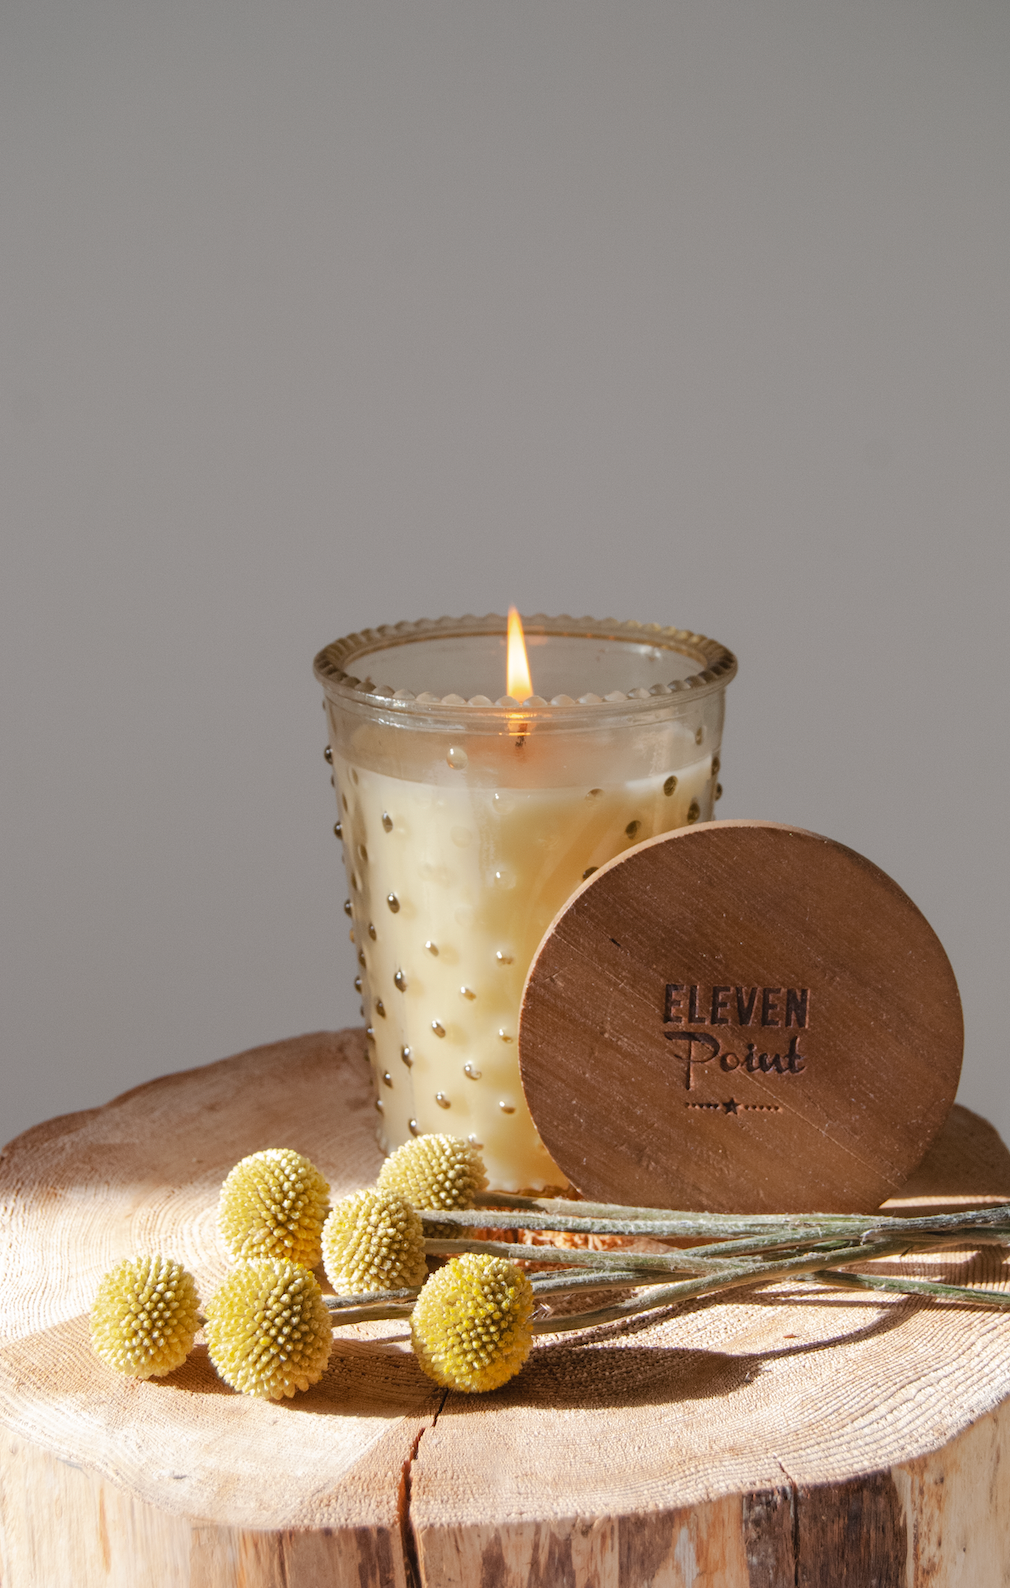 Float Trip Hobnail Candle in Butter Candle Eleven Point   